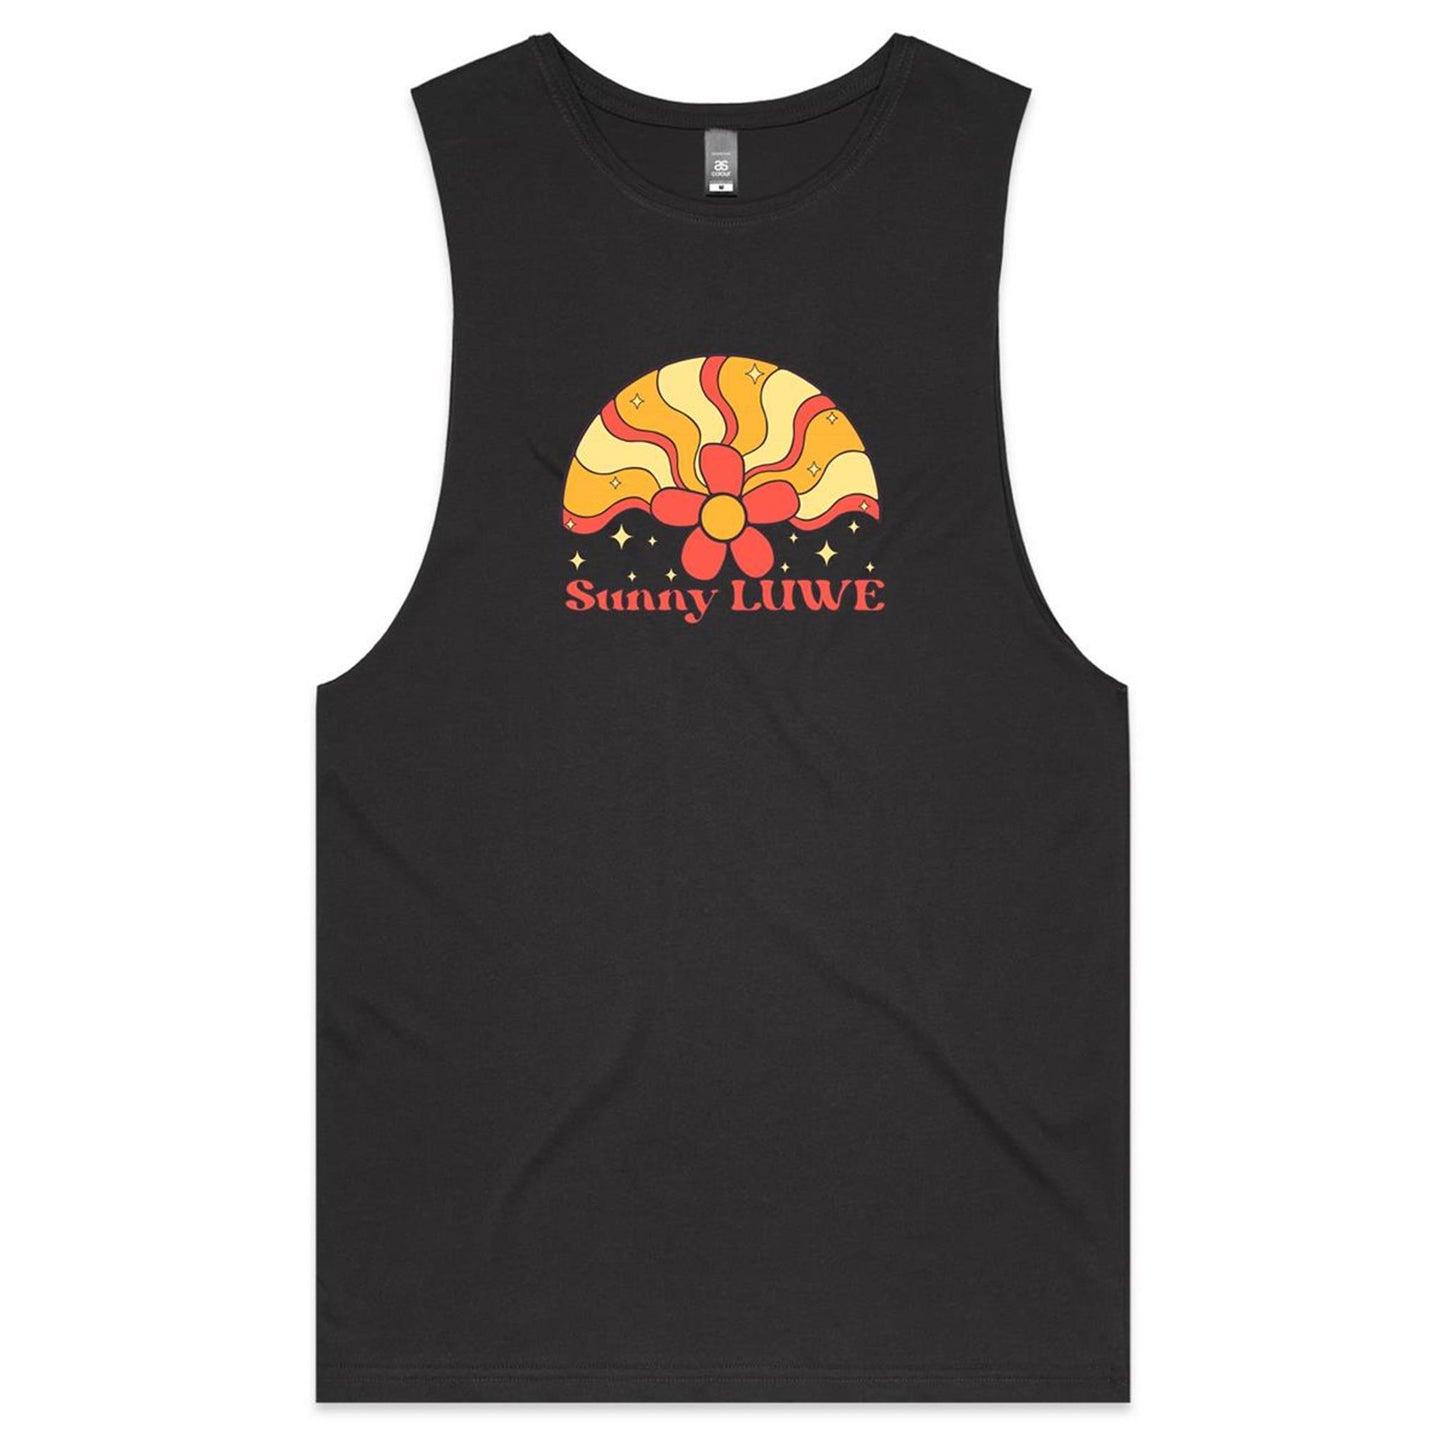 Suns out Guns Out Sunny Luwe Tank Top Tee